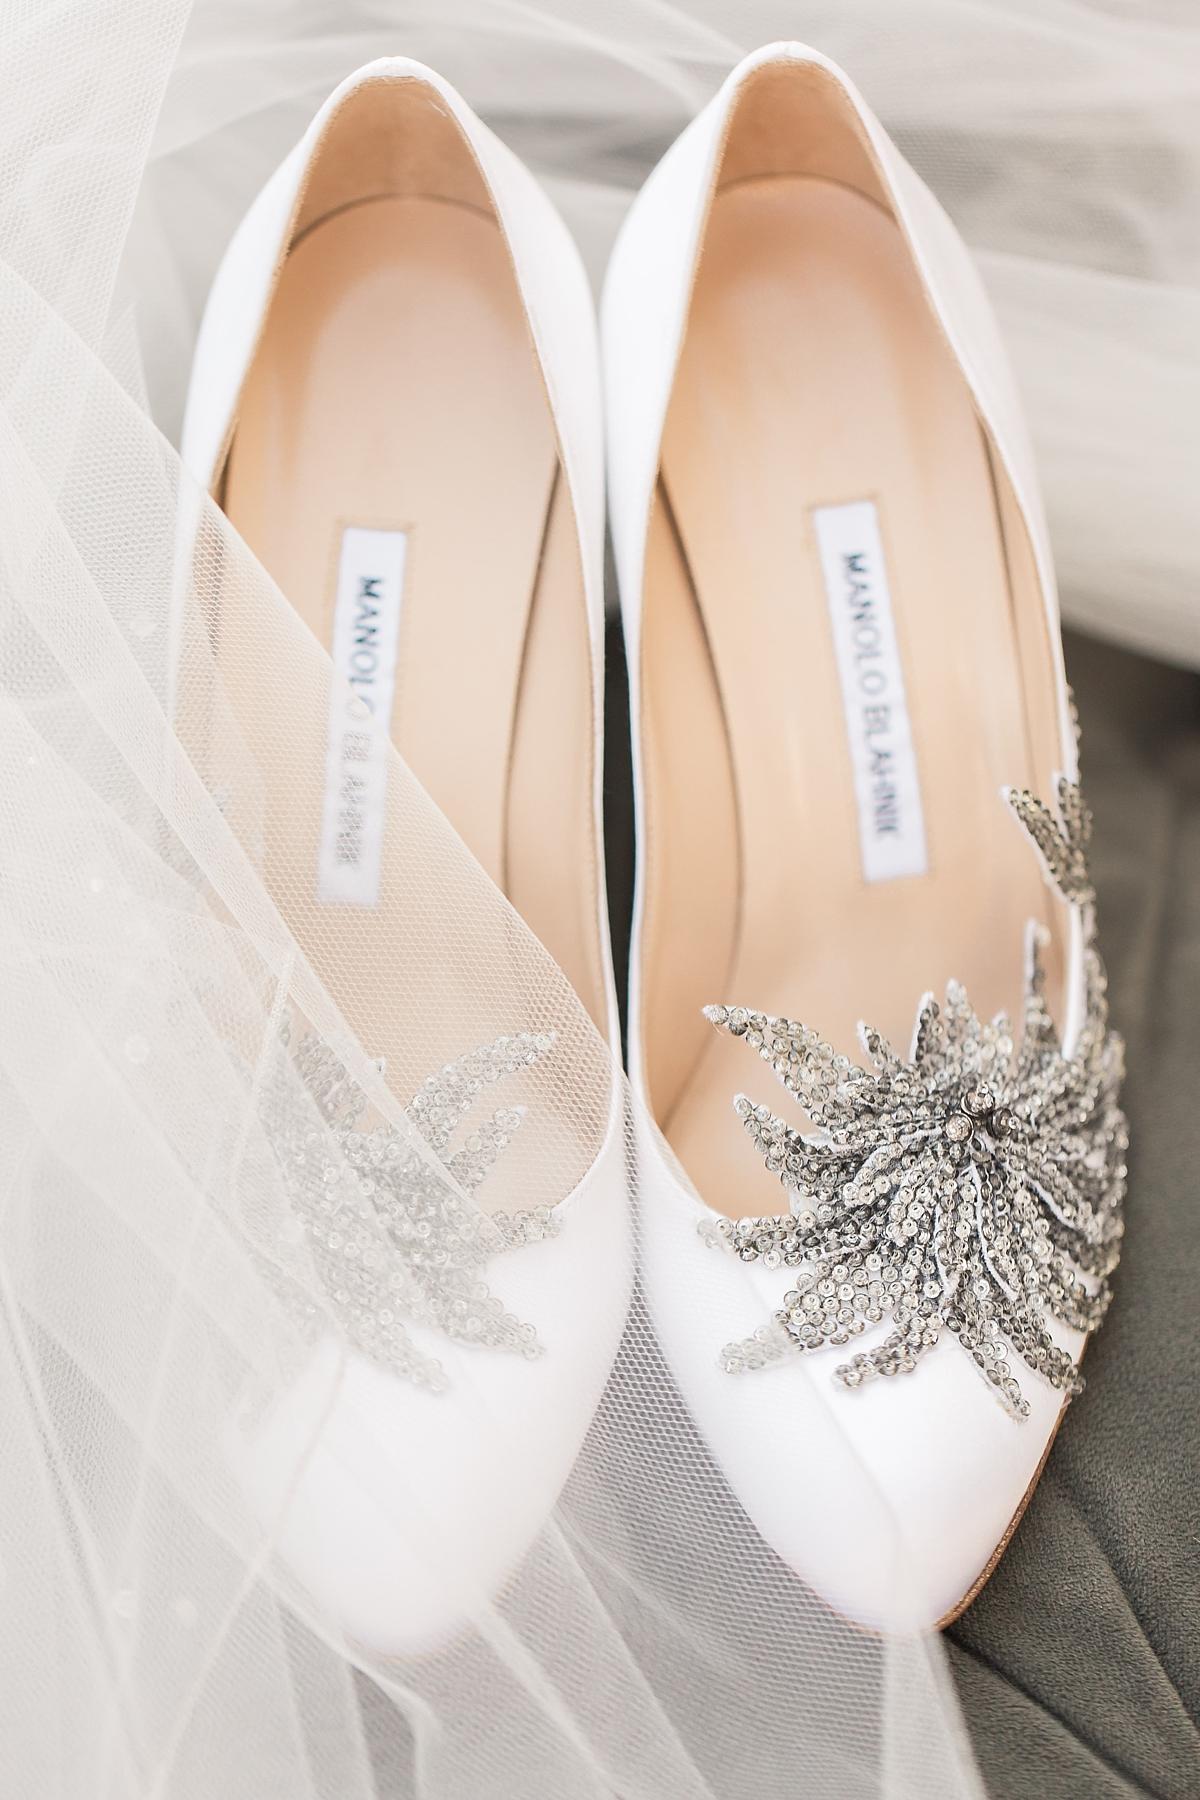 This Washington, DC wedding photographer always recommends brides pack 2 pairs of shoes: those fancy heels for pictures and some comfortable flats for dancing!